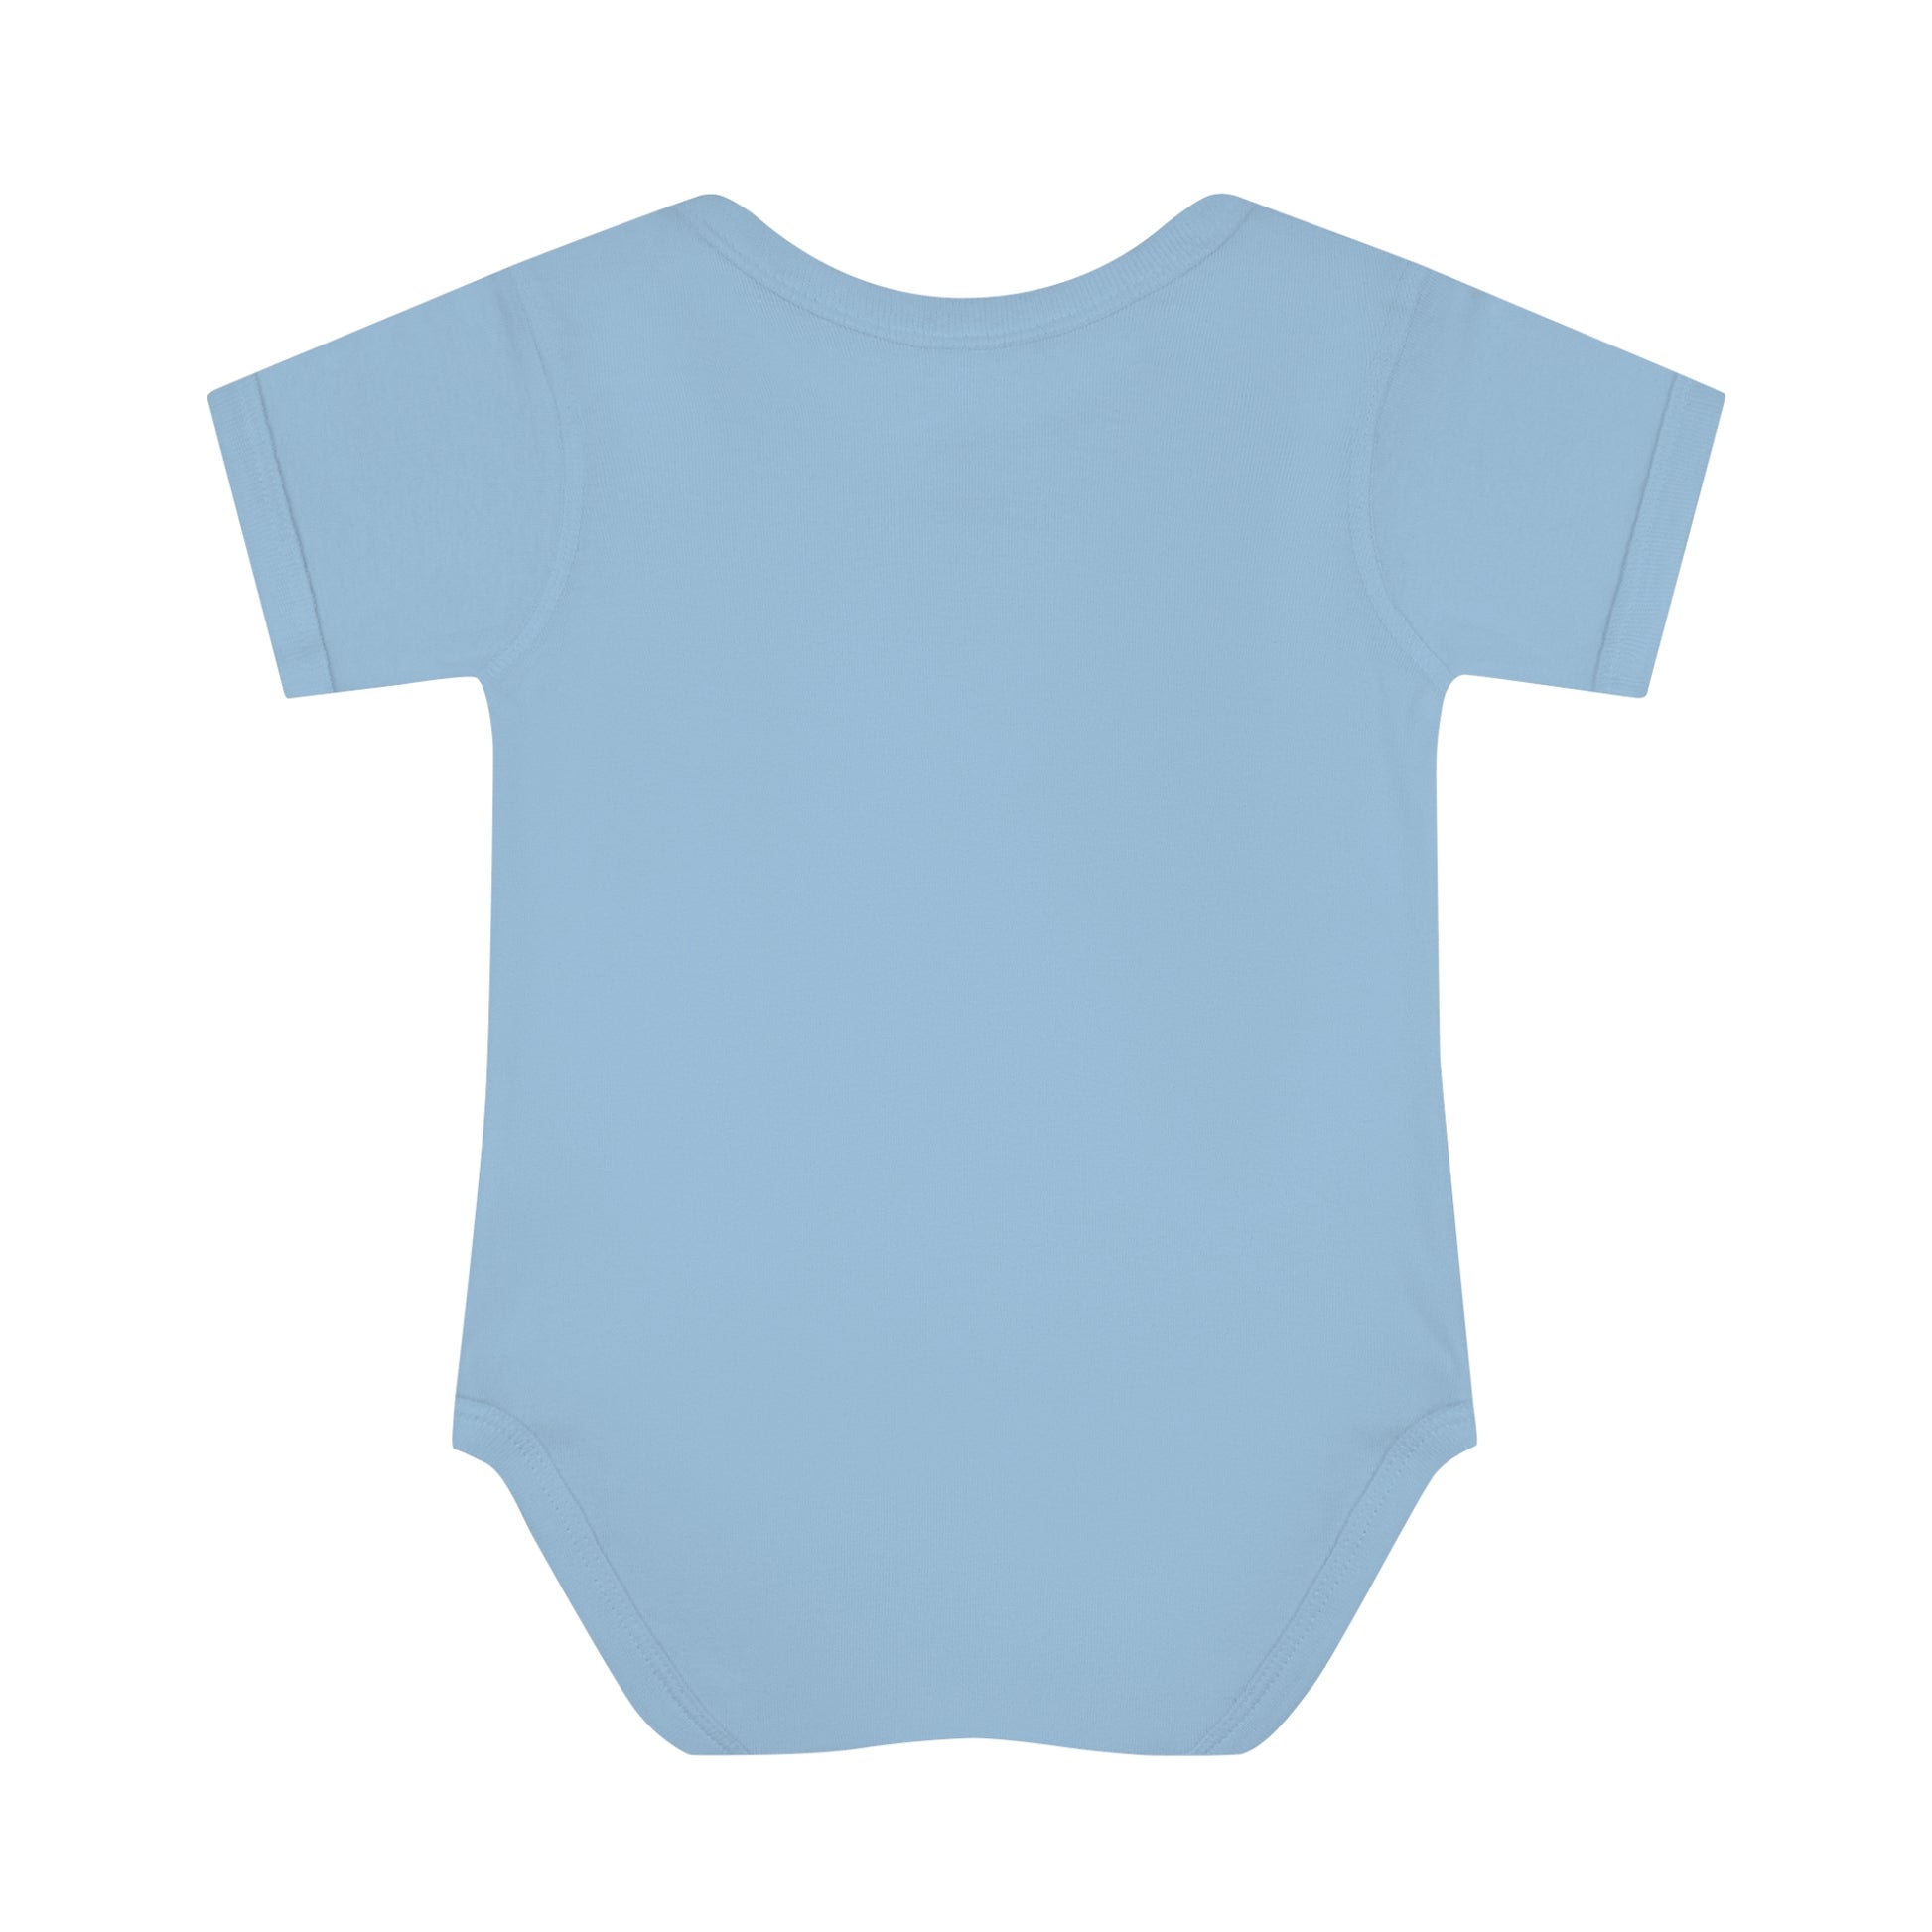 Christ Carried My Burdens So I Could Thrive Christian Baby Onesie Printify